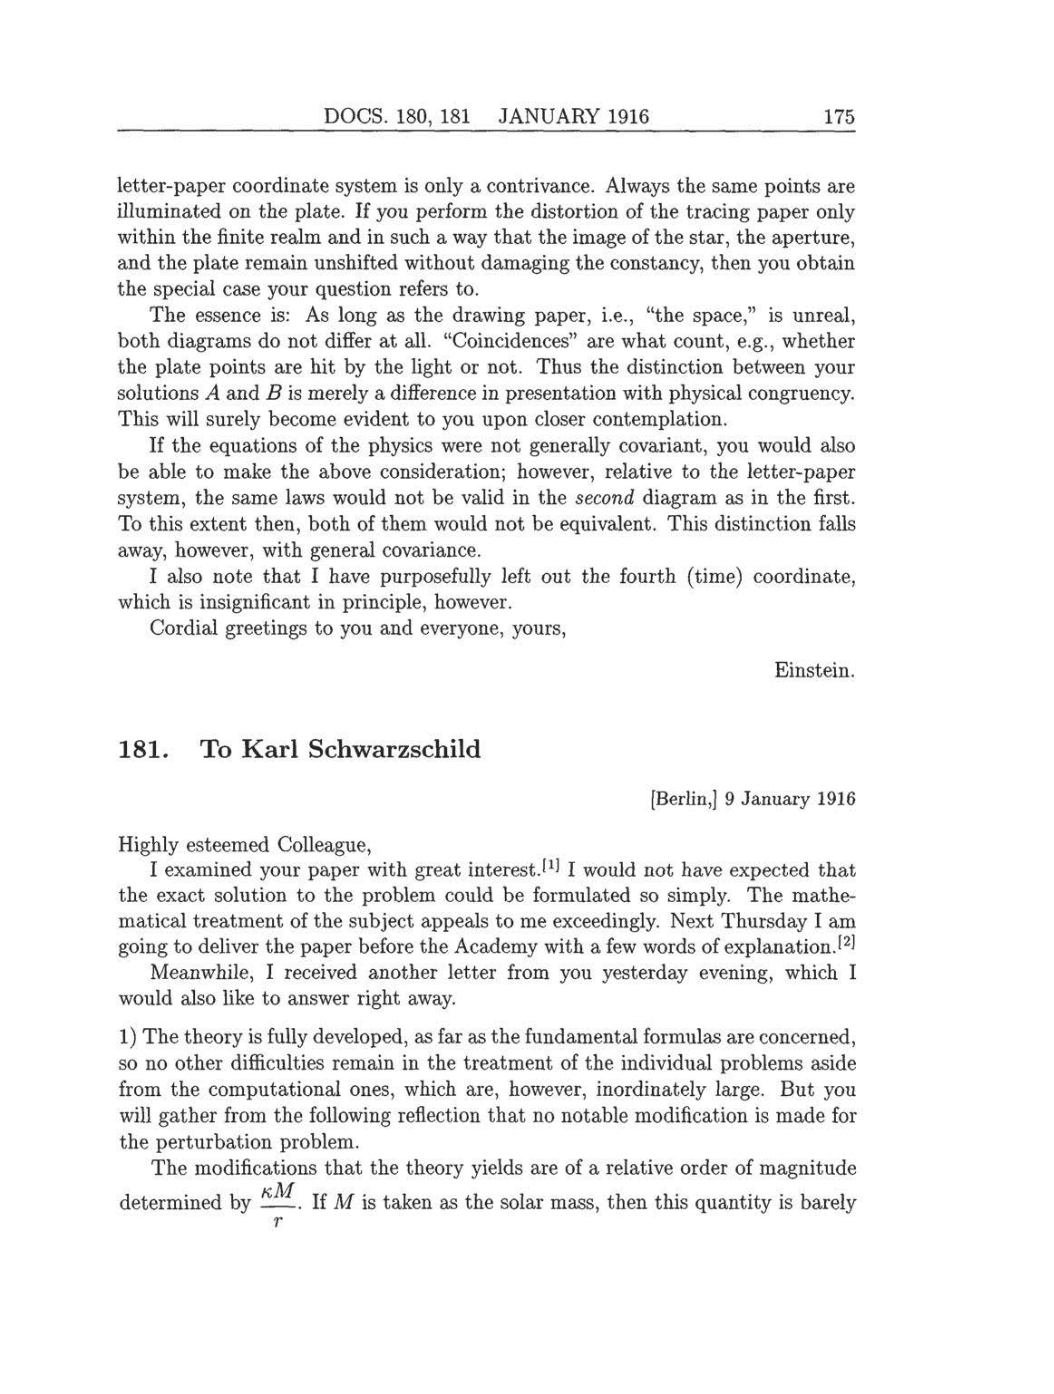 Volume 8: The Berlin Years: Correspondence, 1914-1918 (English translation supplement) page 175